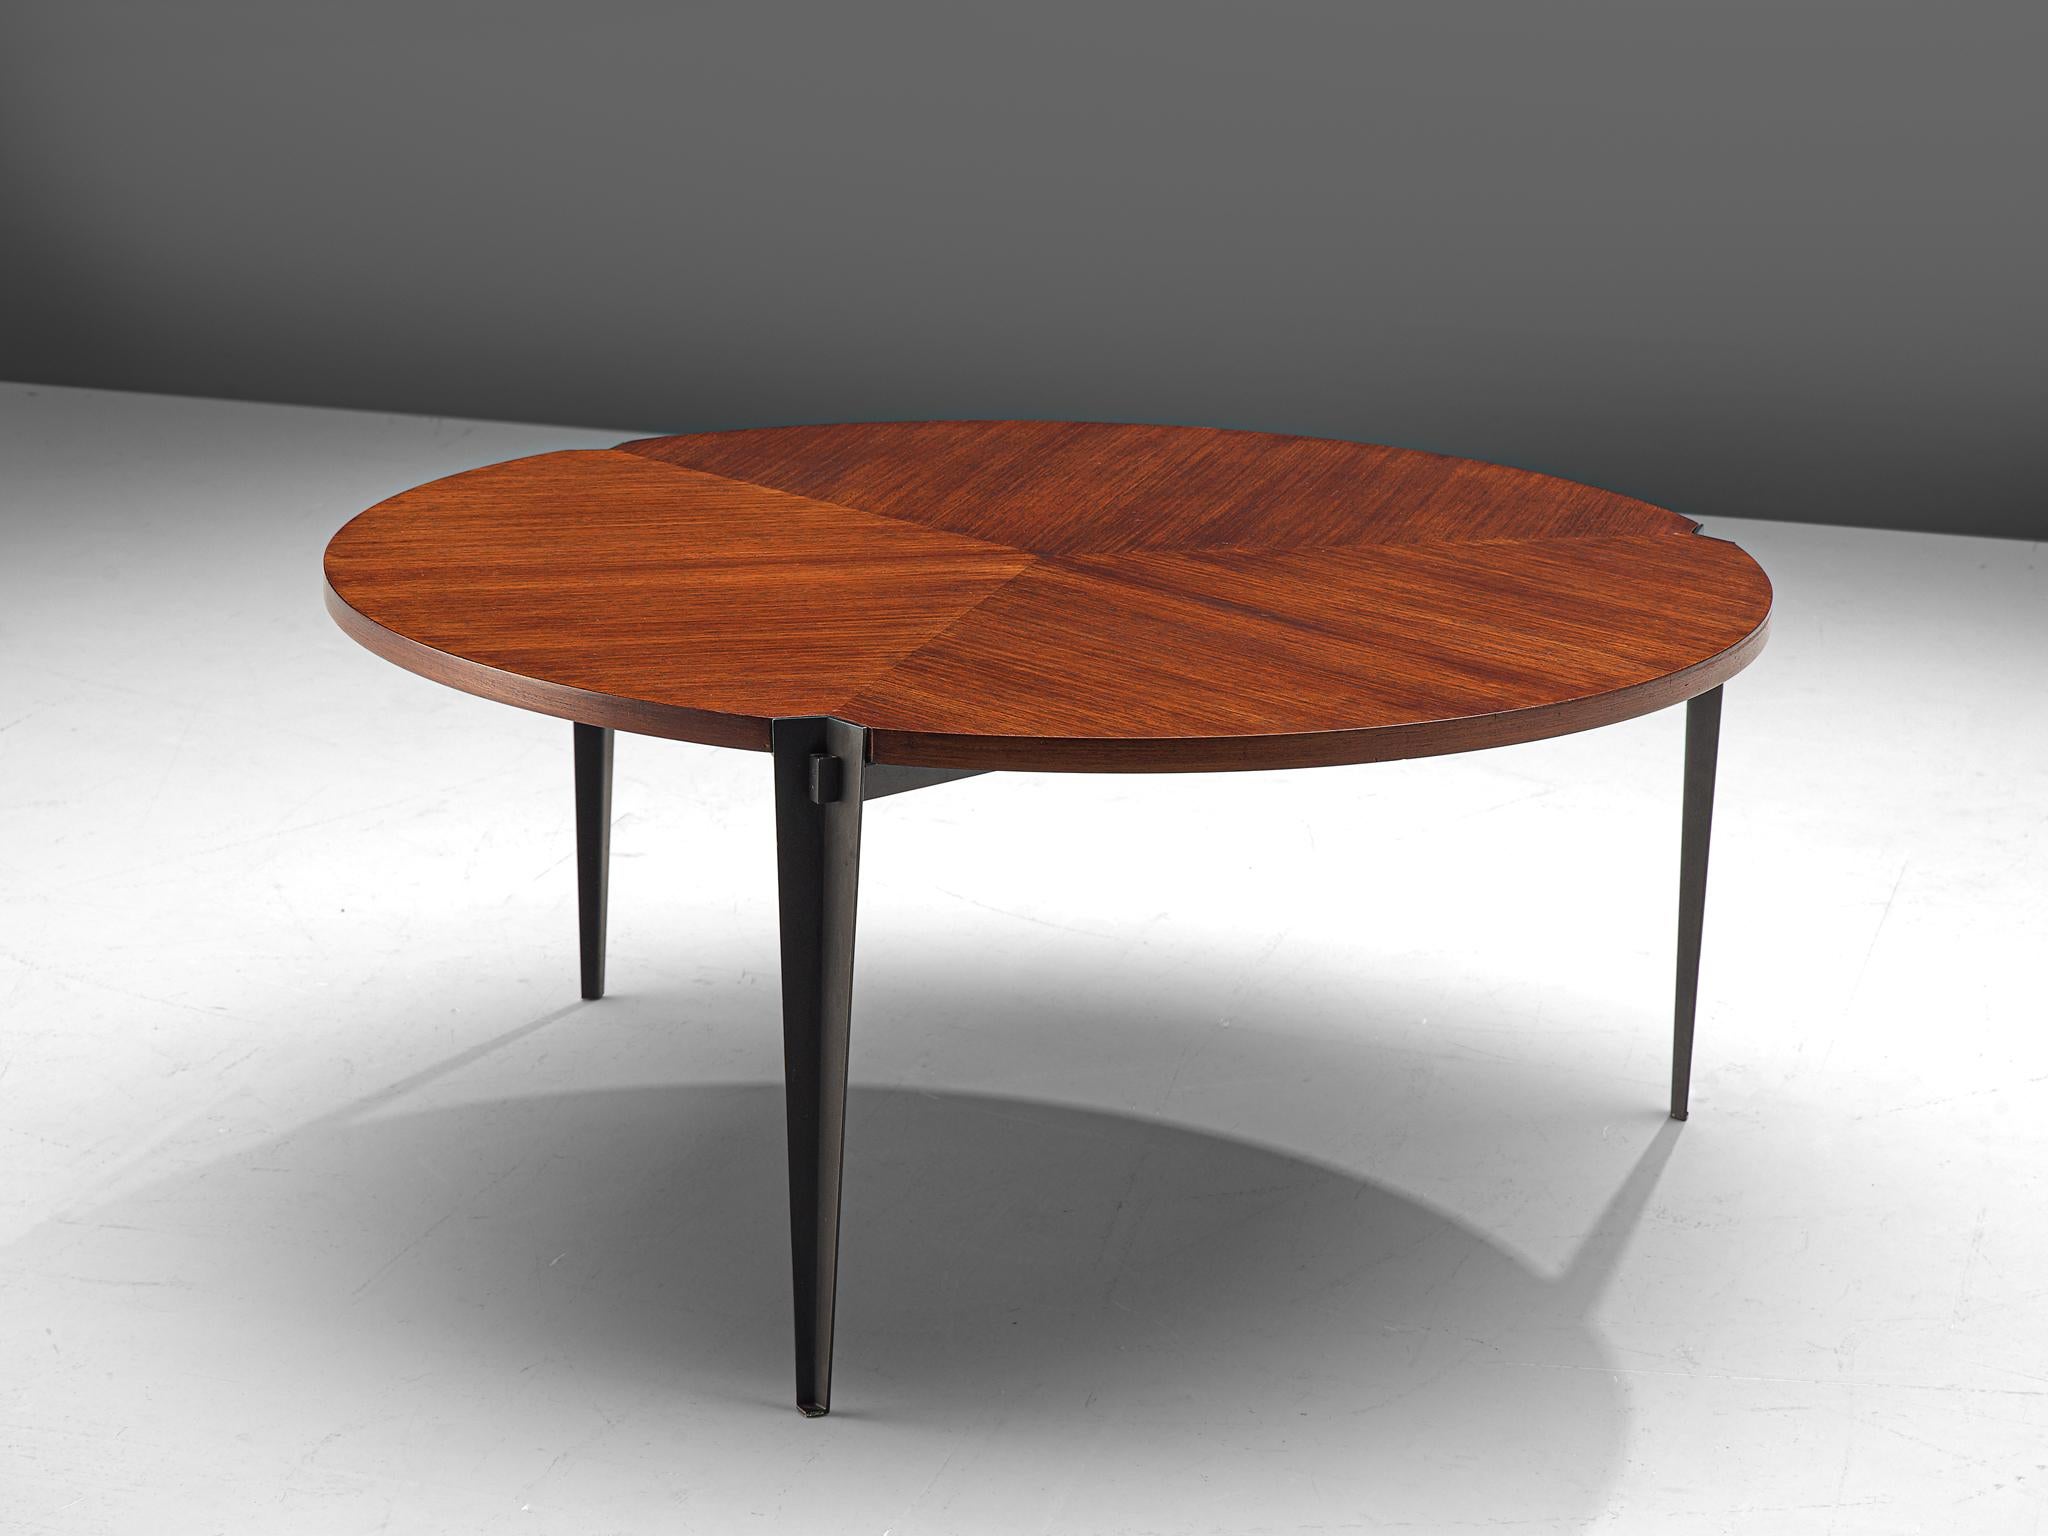 Osvaldo Borsani for Tecno, coffee table model 'T61', teak and metal, Italy, 1957.

Elegant coffee tables, designed by Osvaldo Borsani and produced by Tecno. The table has a round tabletop of teak veneer, which is inlayed in a triangular shape. The